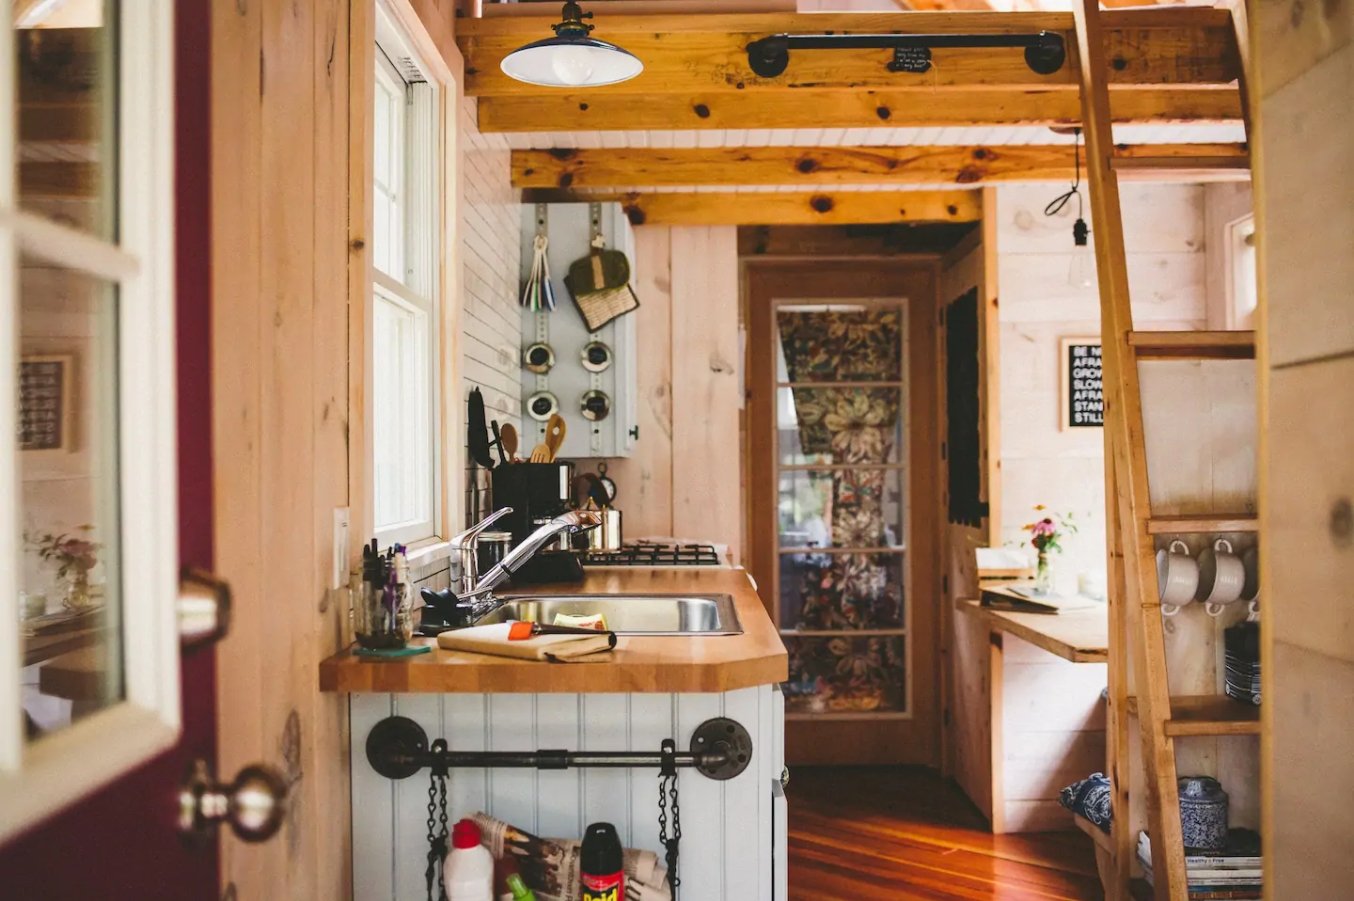  Tiny  Homes  For Rent on Airbnb  Tagged michigan Dream 